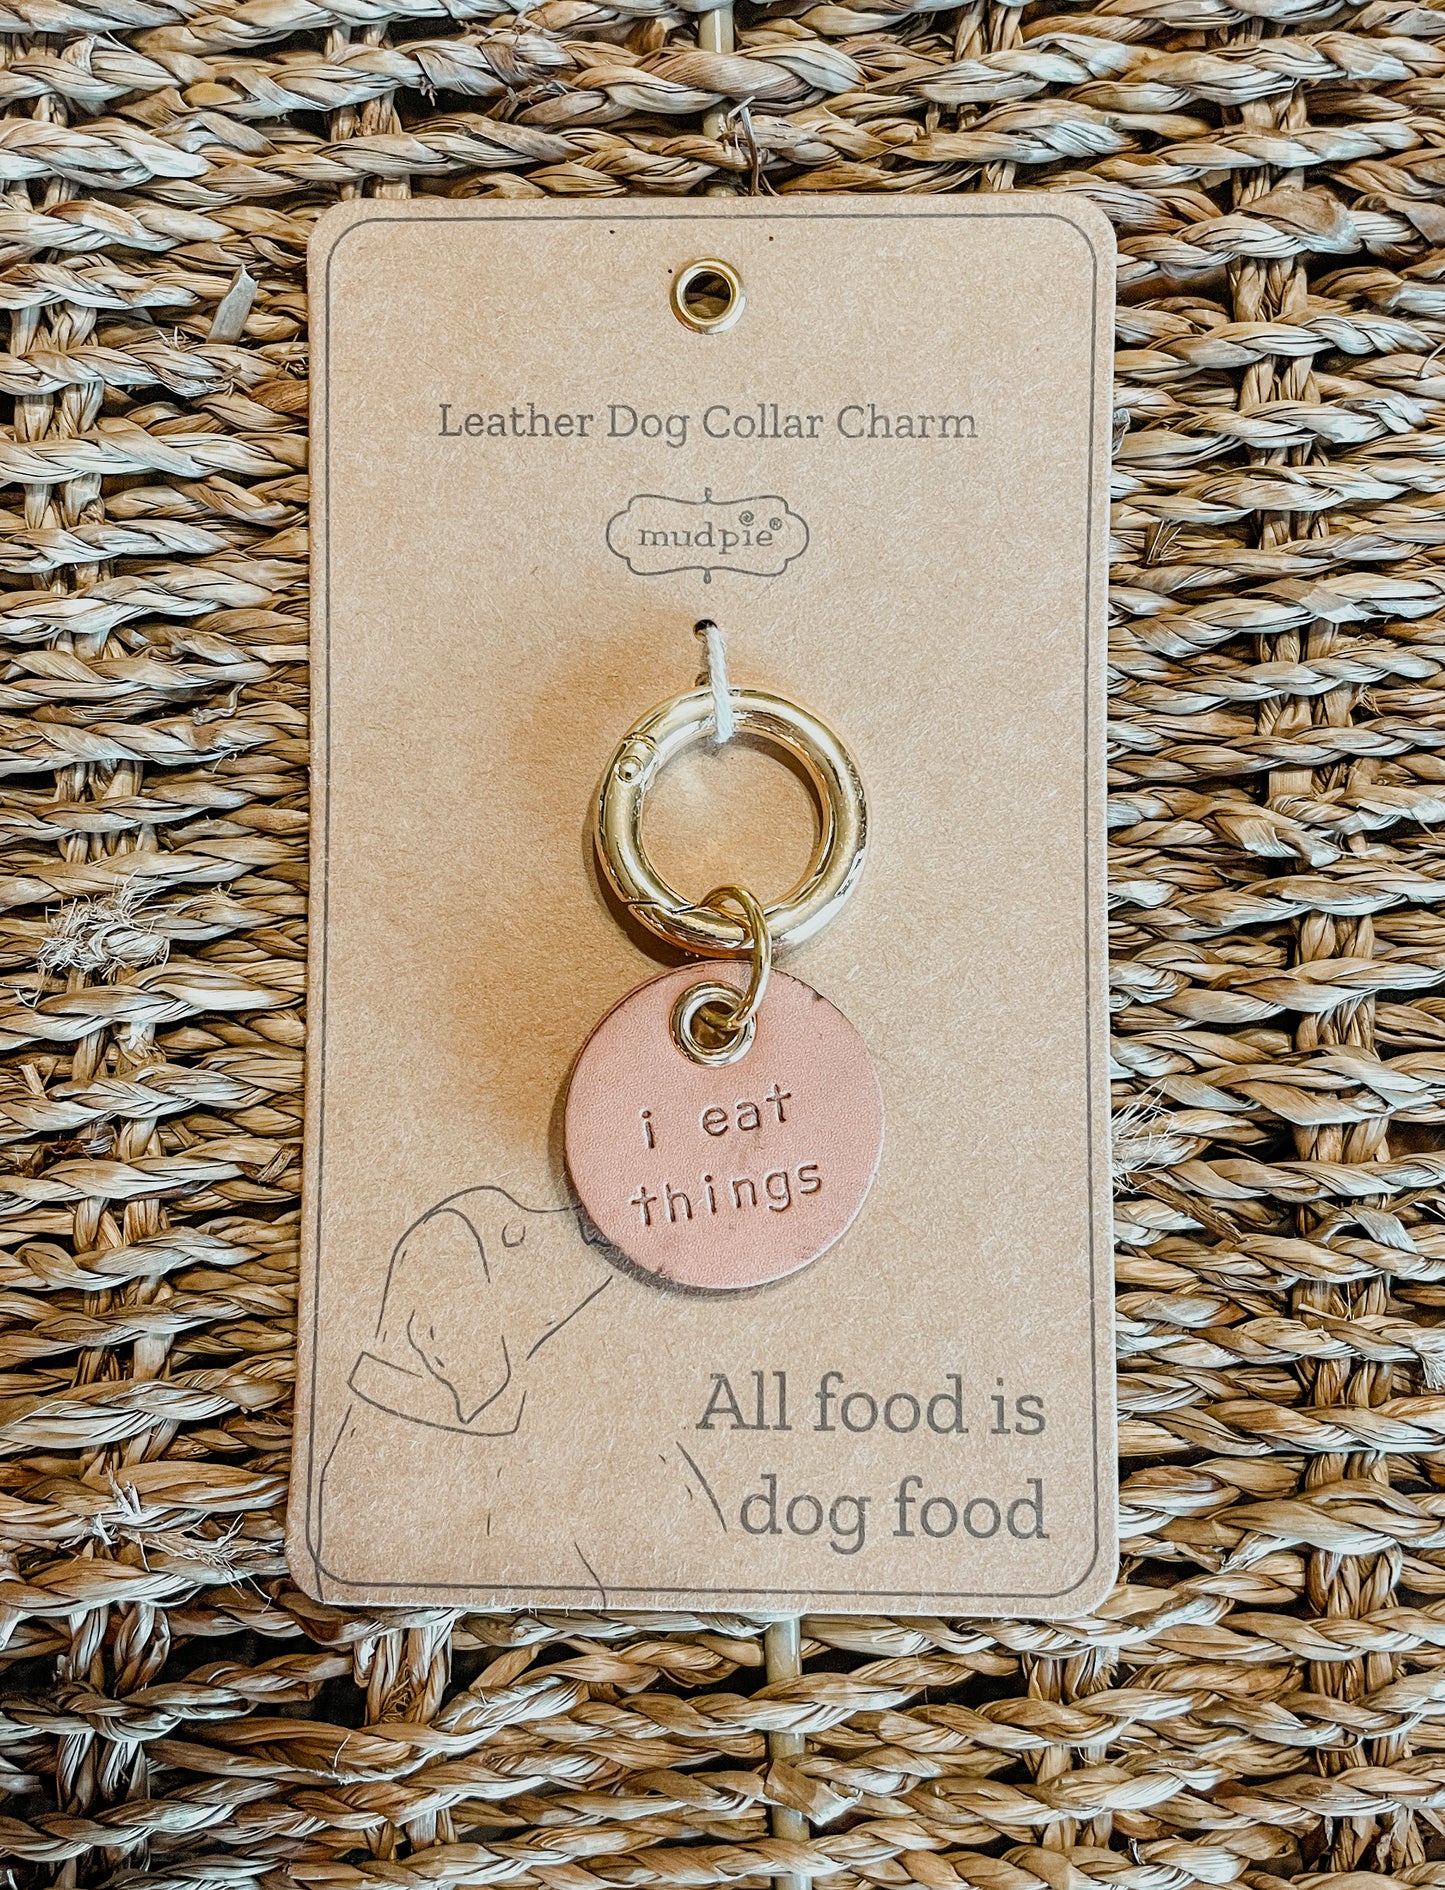 I Eat Things Leather Collar Charm